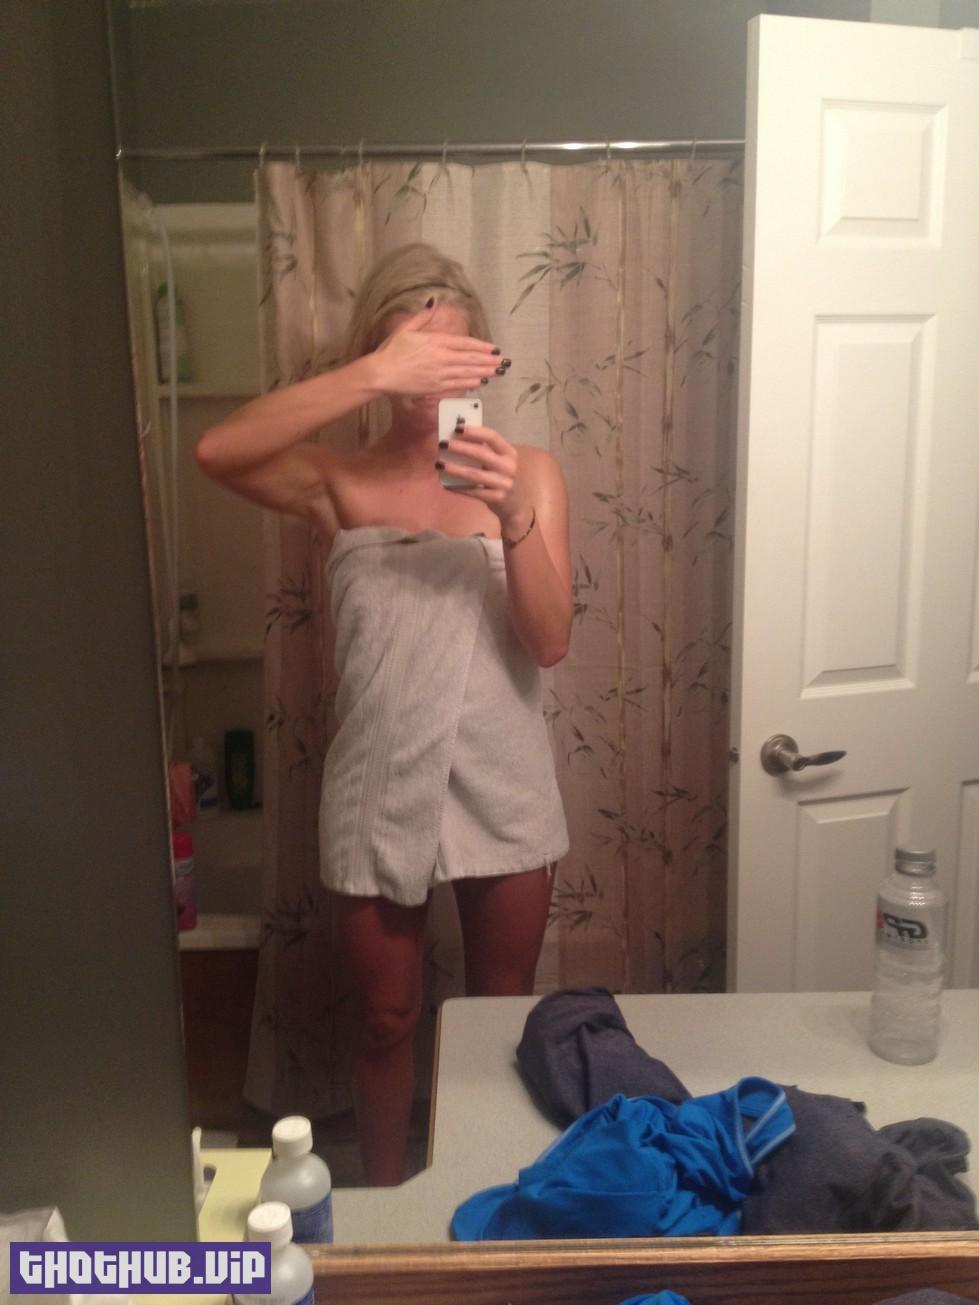 1673023636 696 The Fappening 2 Kaylyn Kyle Leaked Nude 100 New Photos